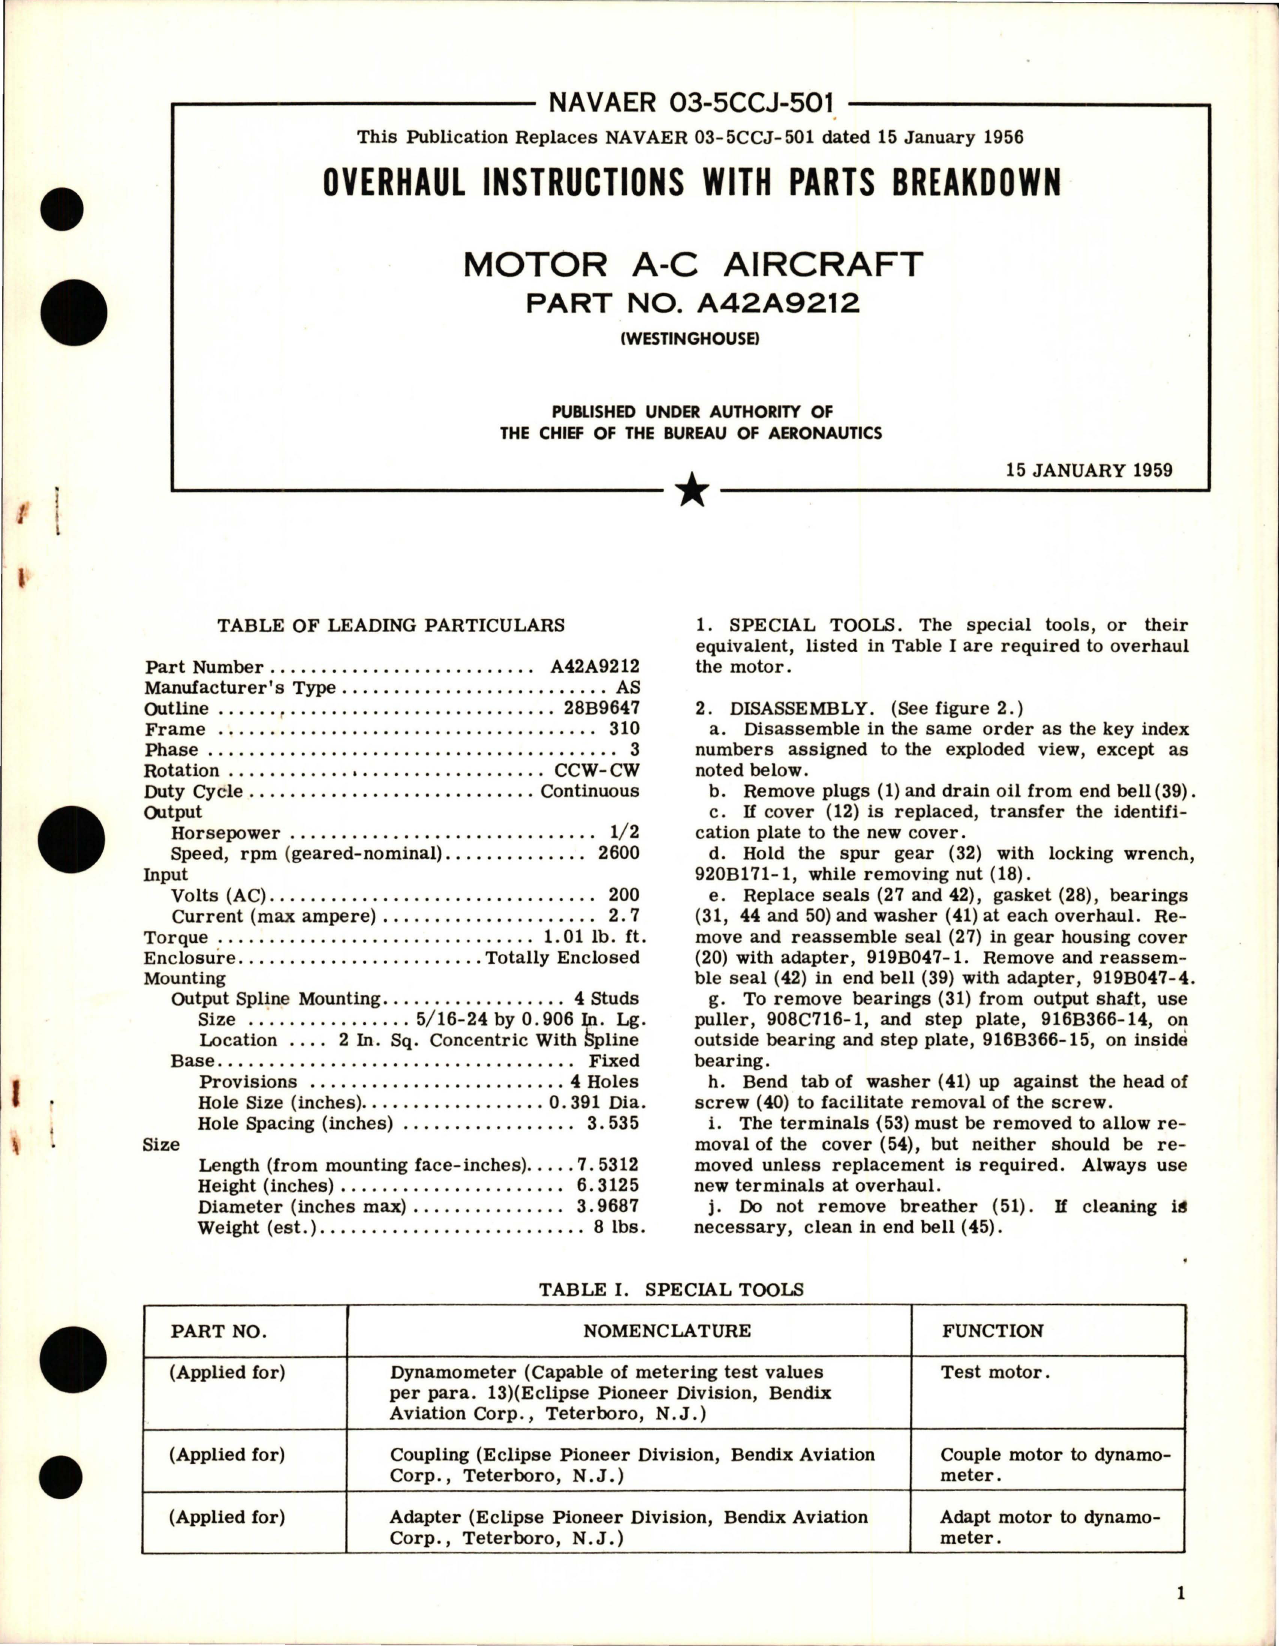 Sample page 1 from AirCorps Library document: Overhaul Instructions with Parts Breakdown for A-C Motor - Part A42A9212 